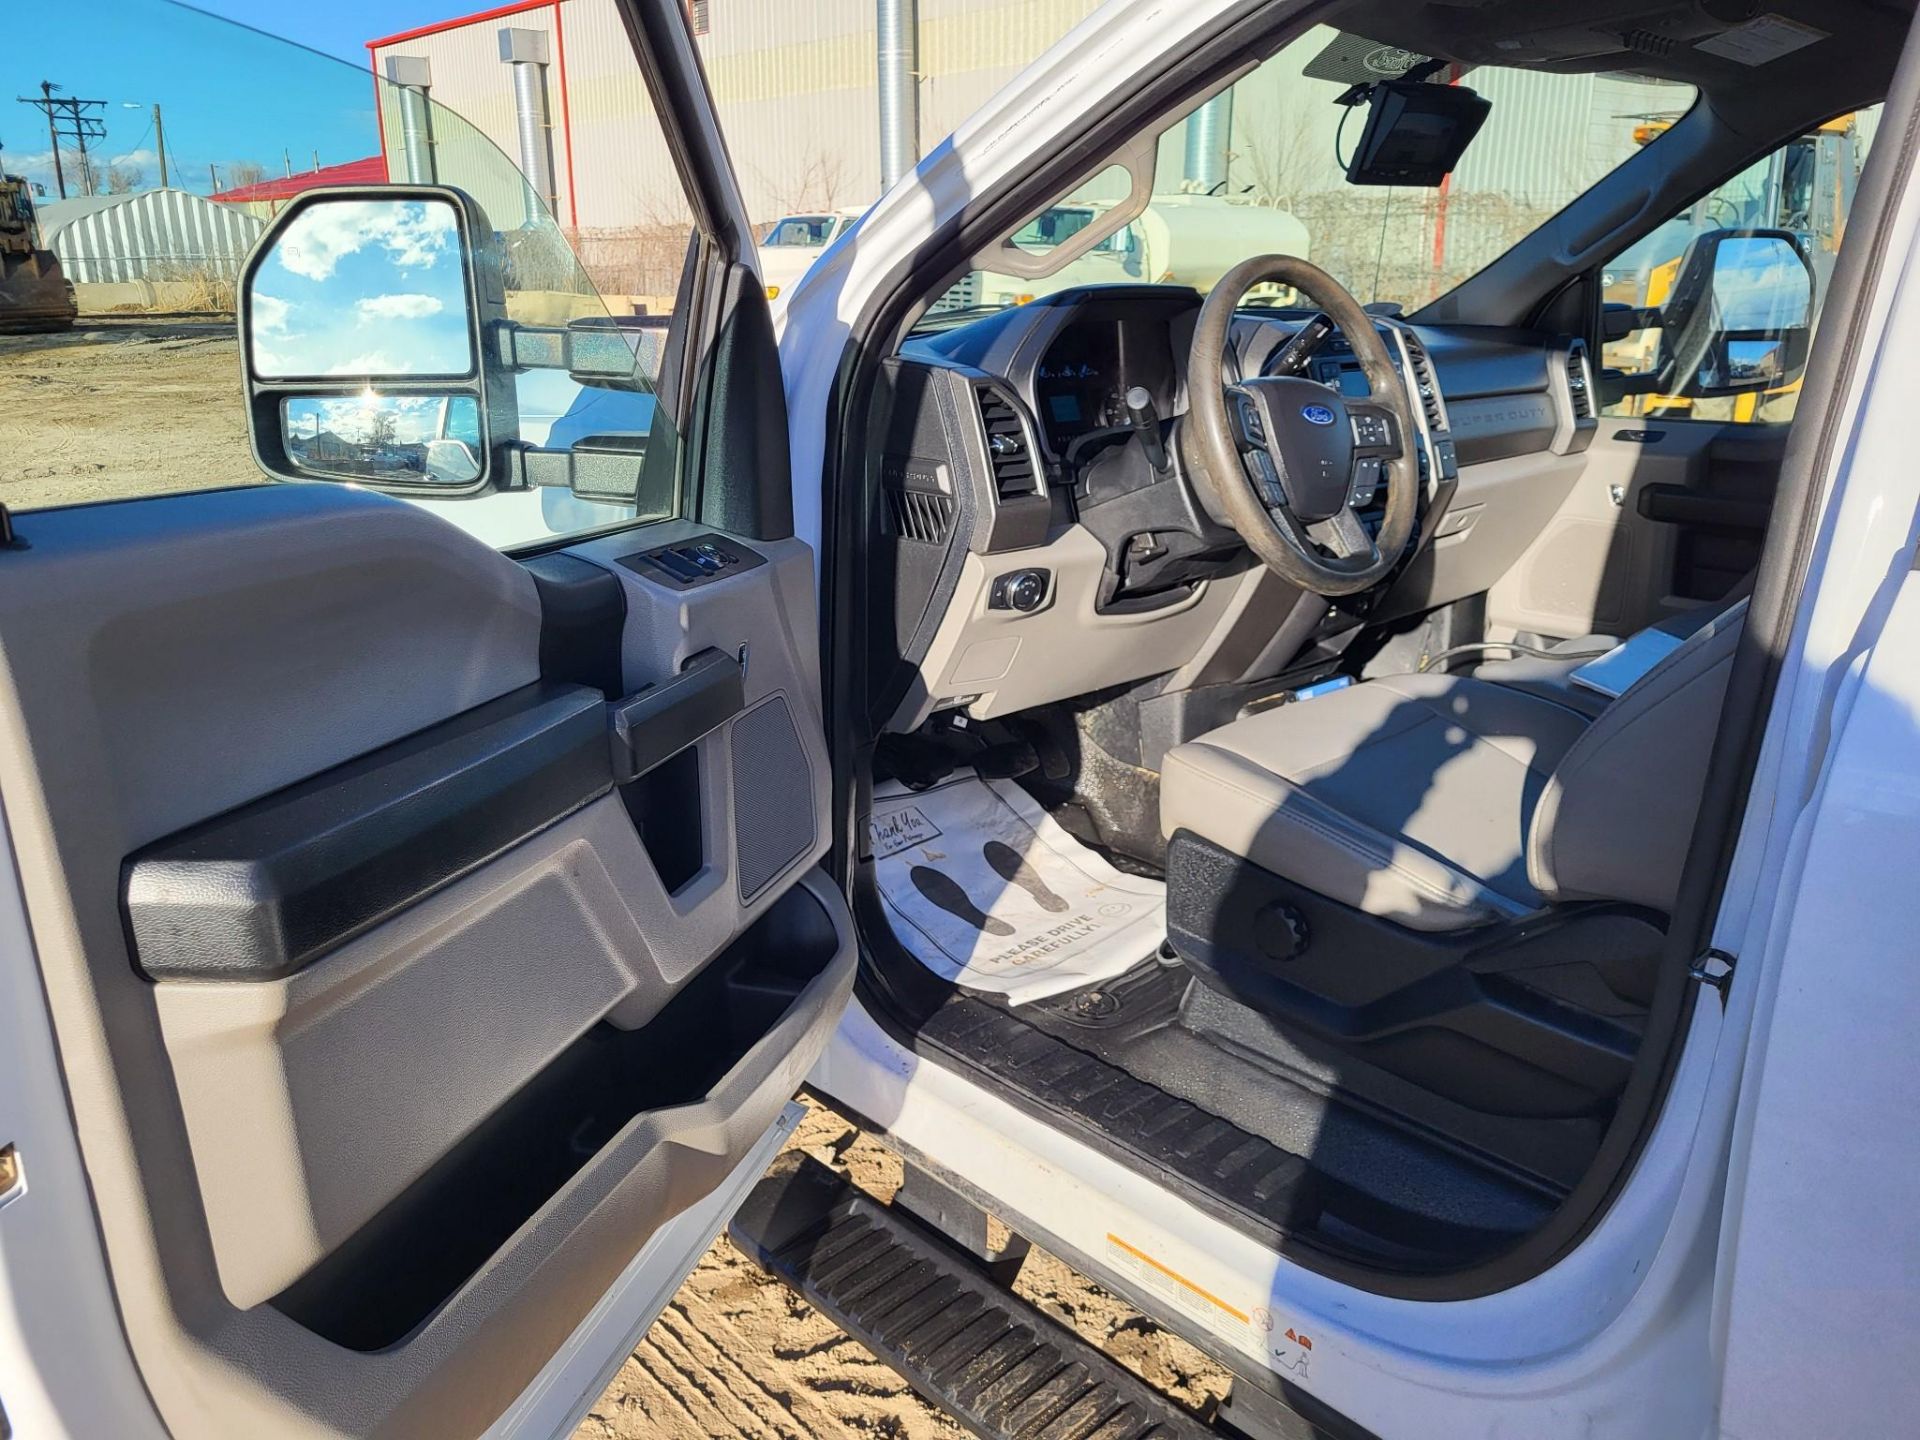 2019 FORD F550 CREW CAB DIESEL DUALLY DUMP TRUCK 31,872 MILES - Image 15 of 34